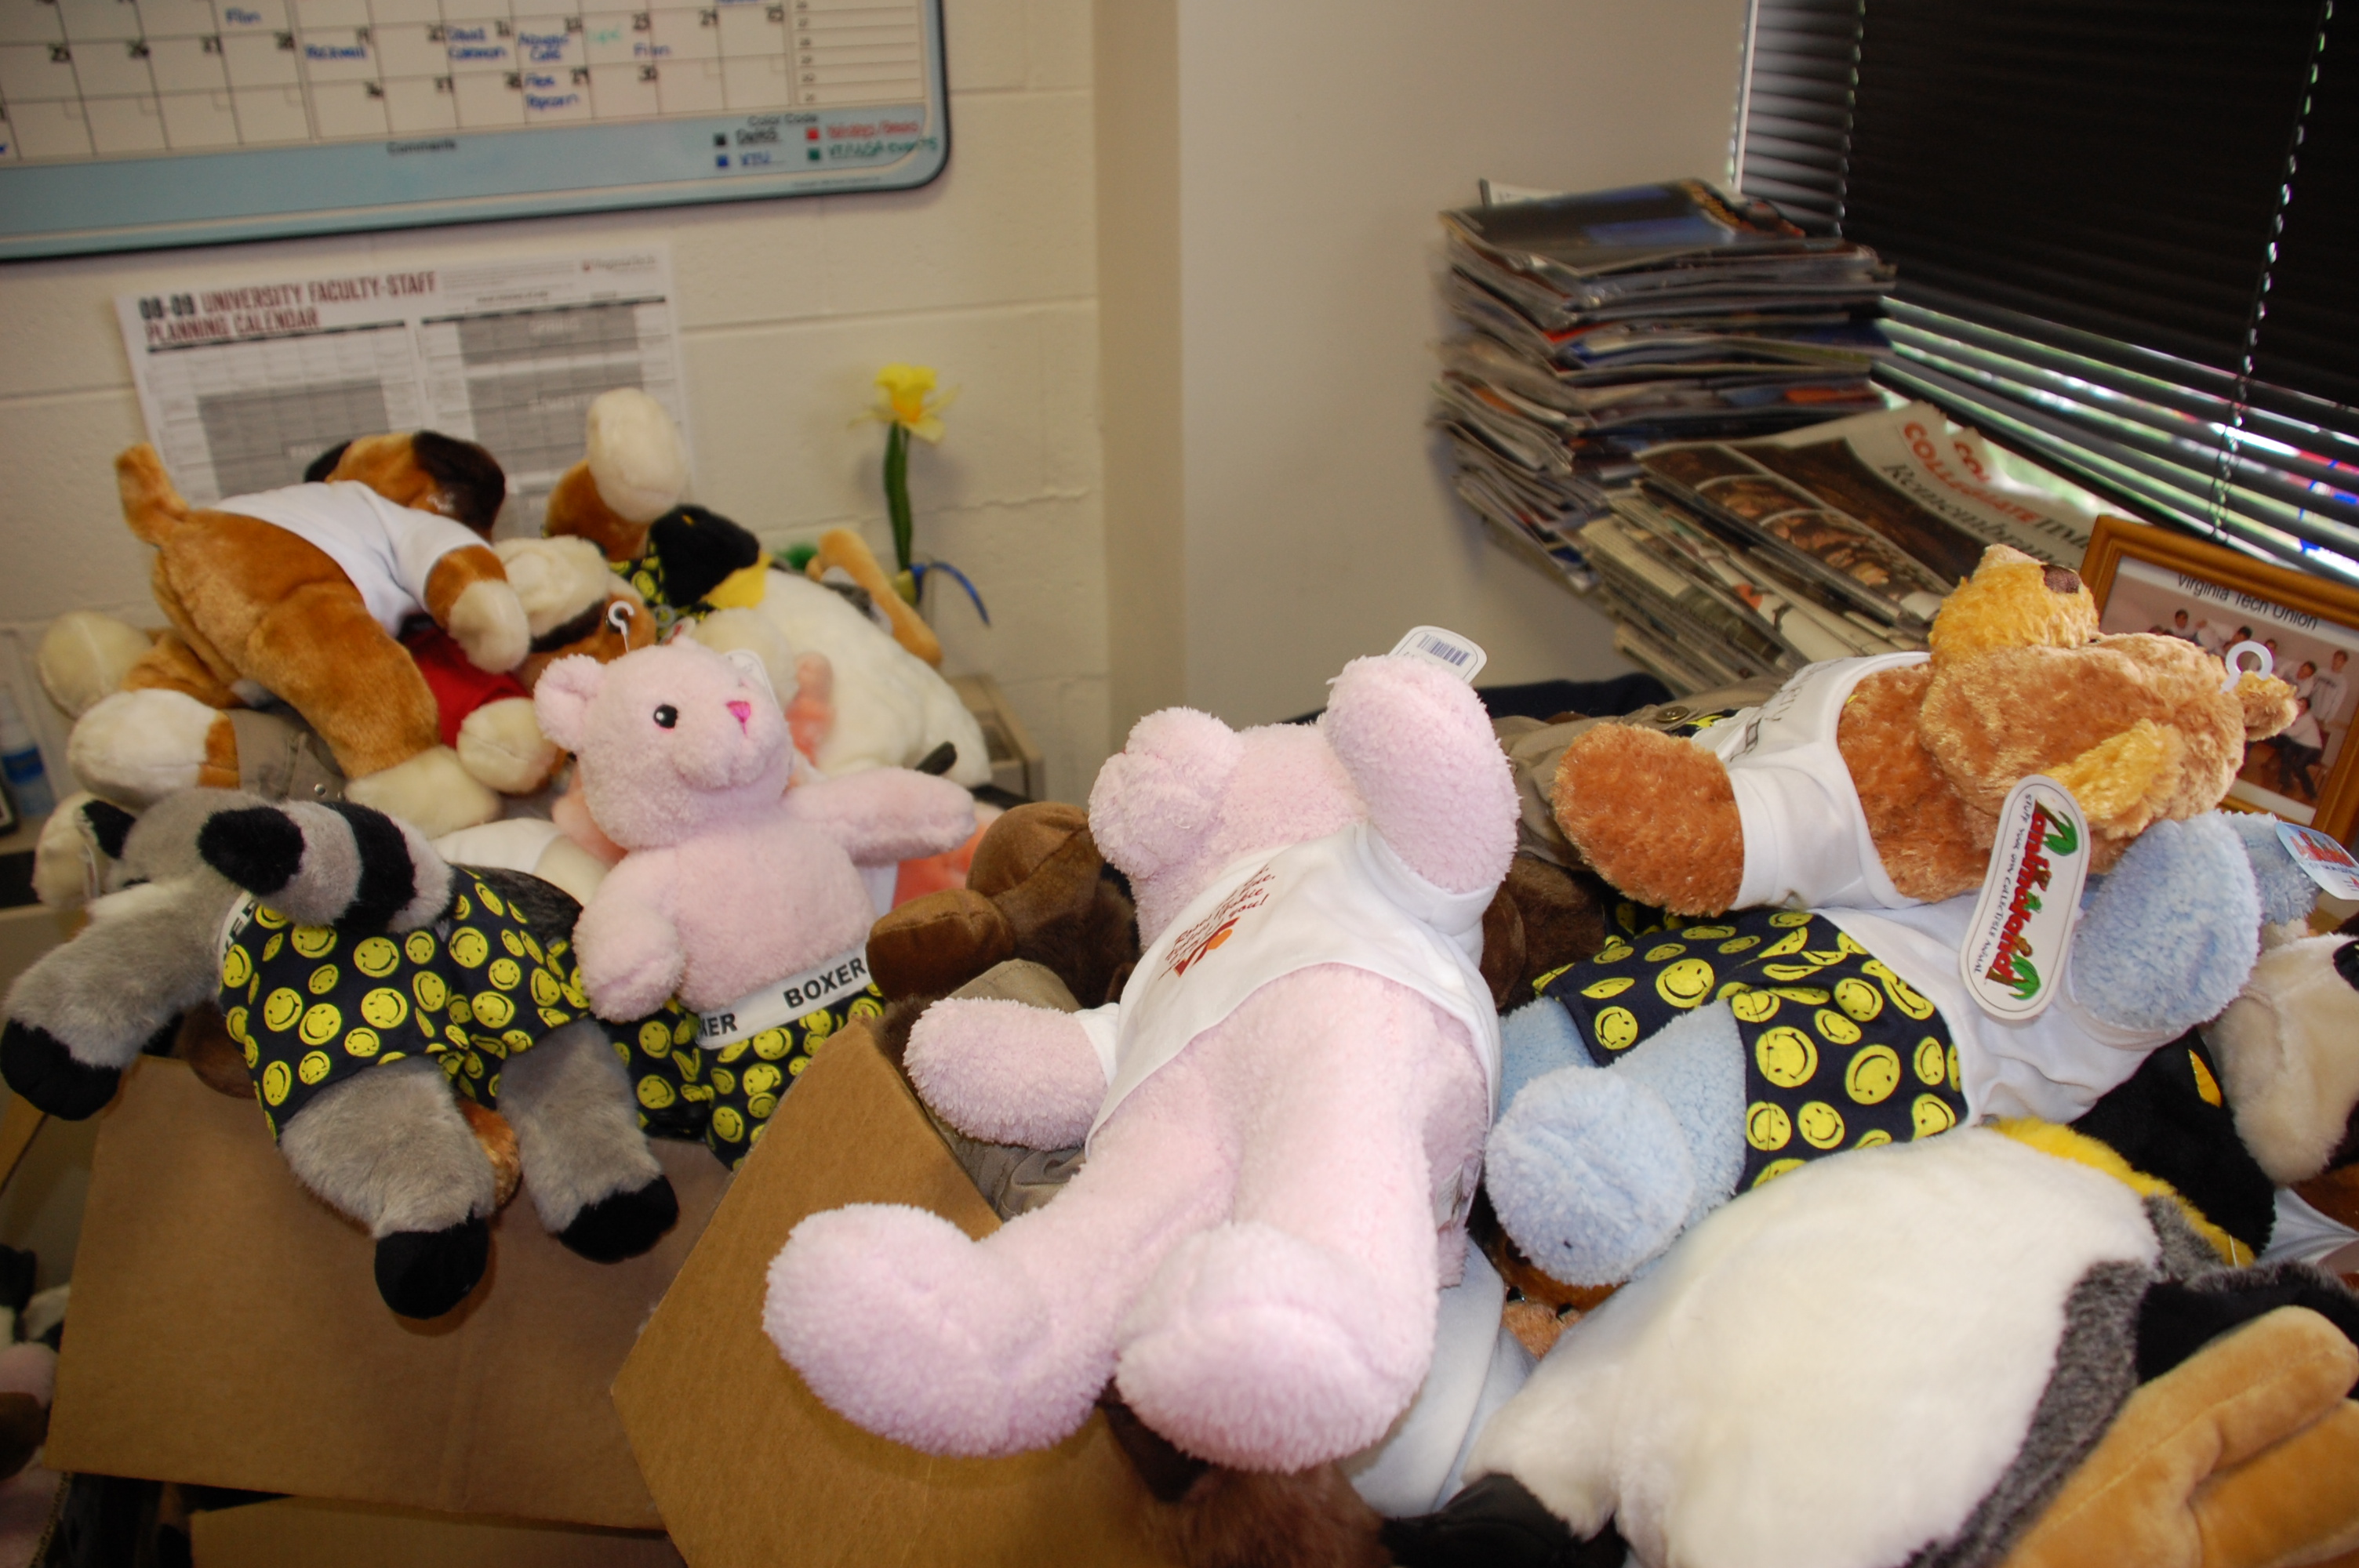 More than 125 stuffed animals are on their way to new homes, thanks to the Virginia Tech Union and NRV Cares.